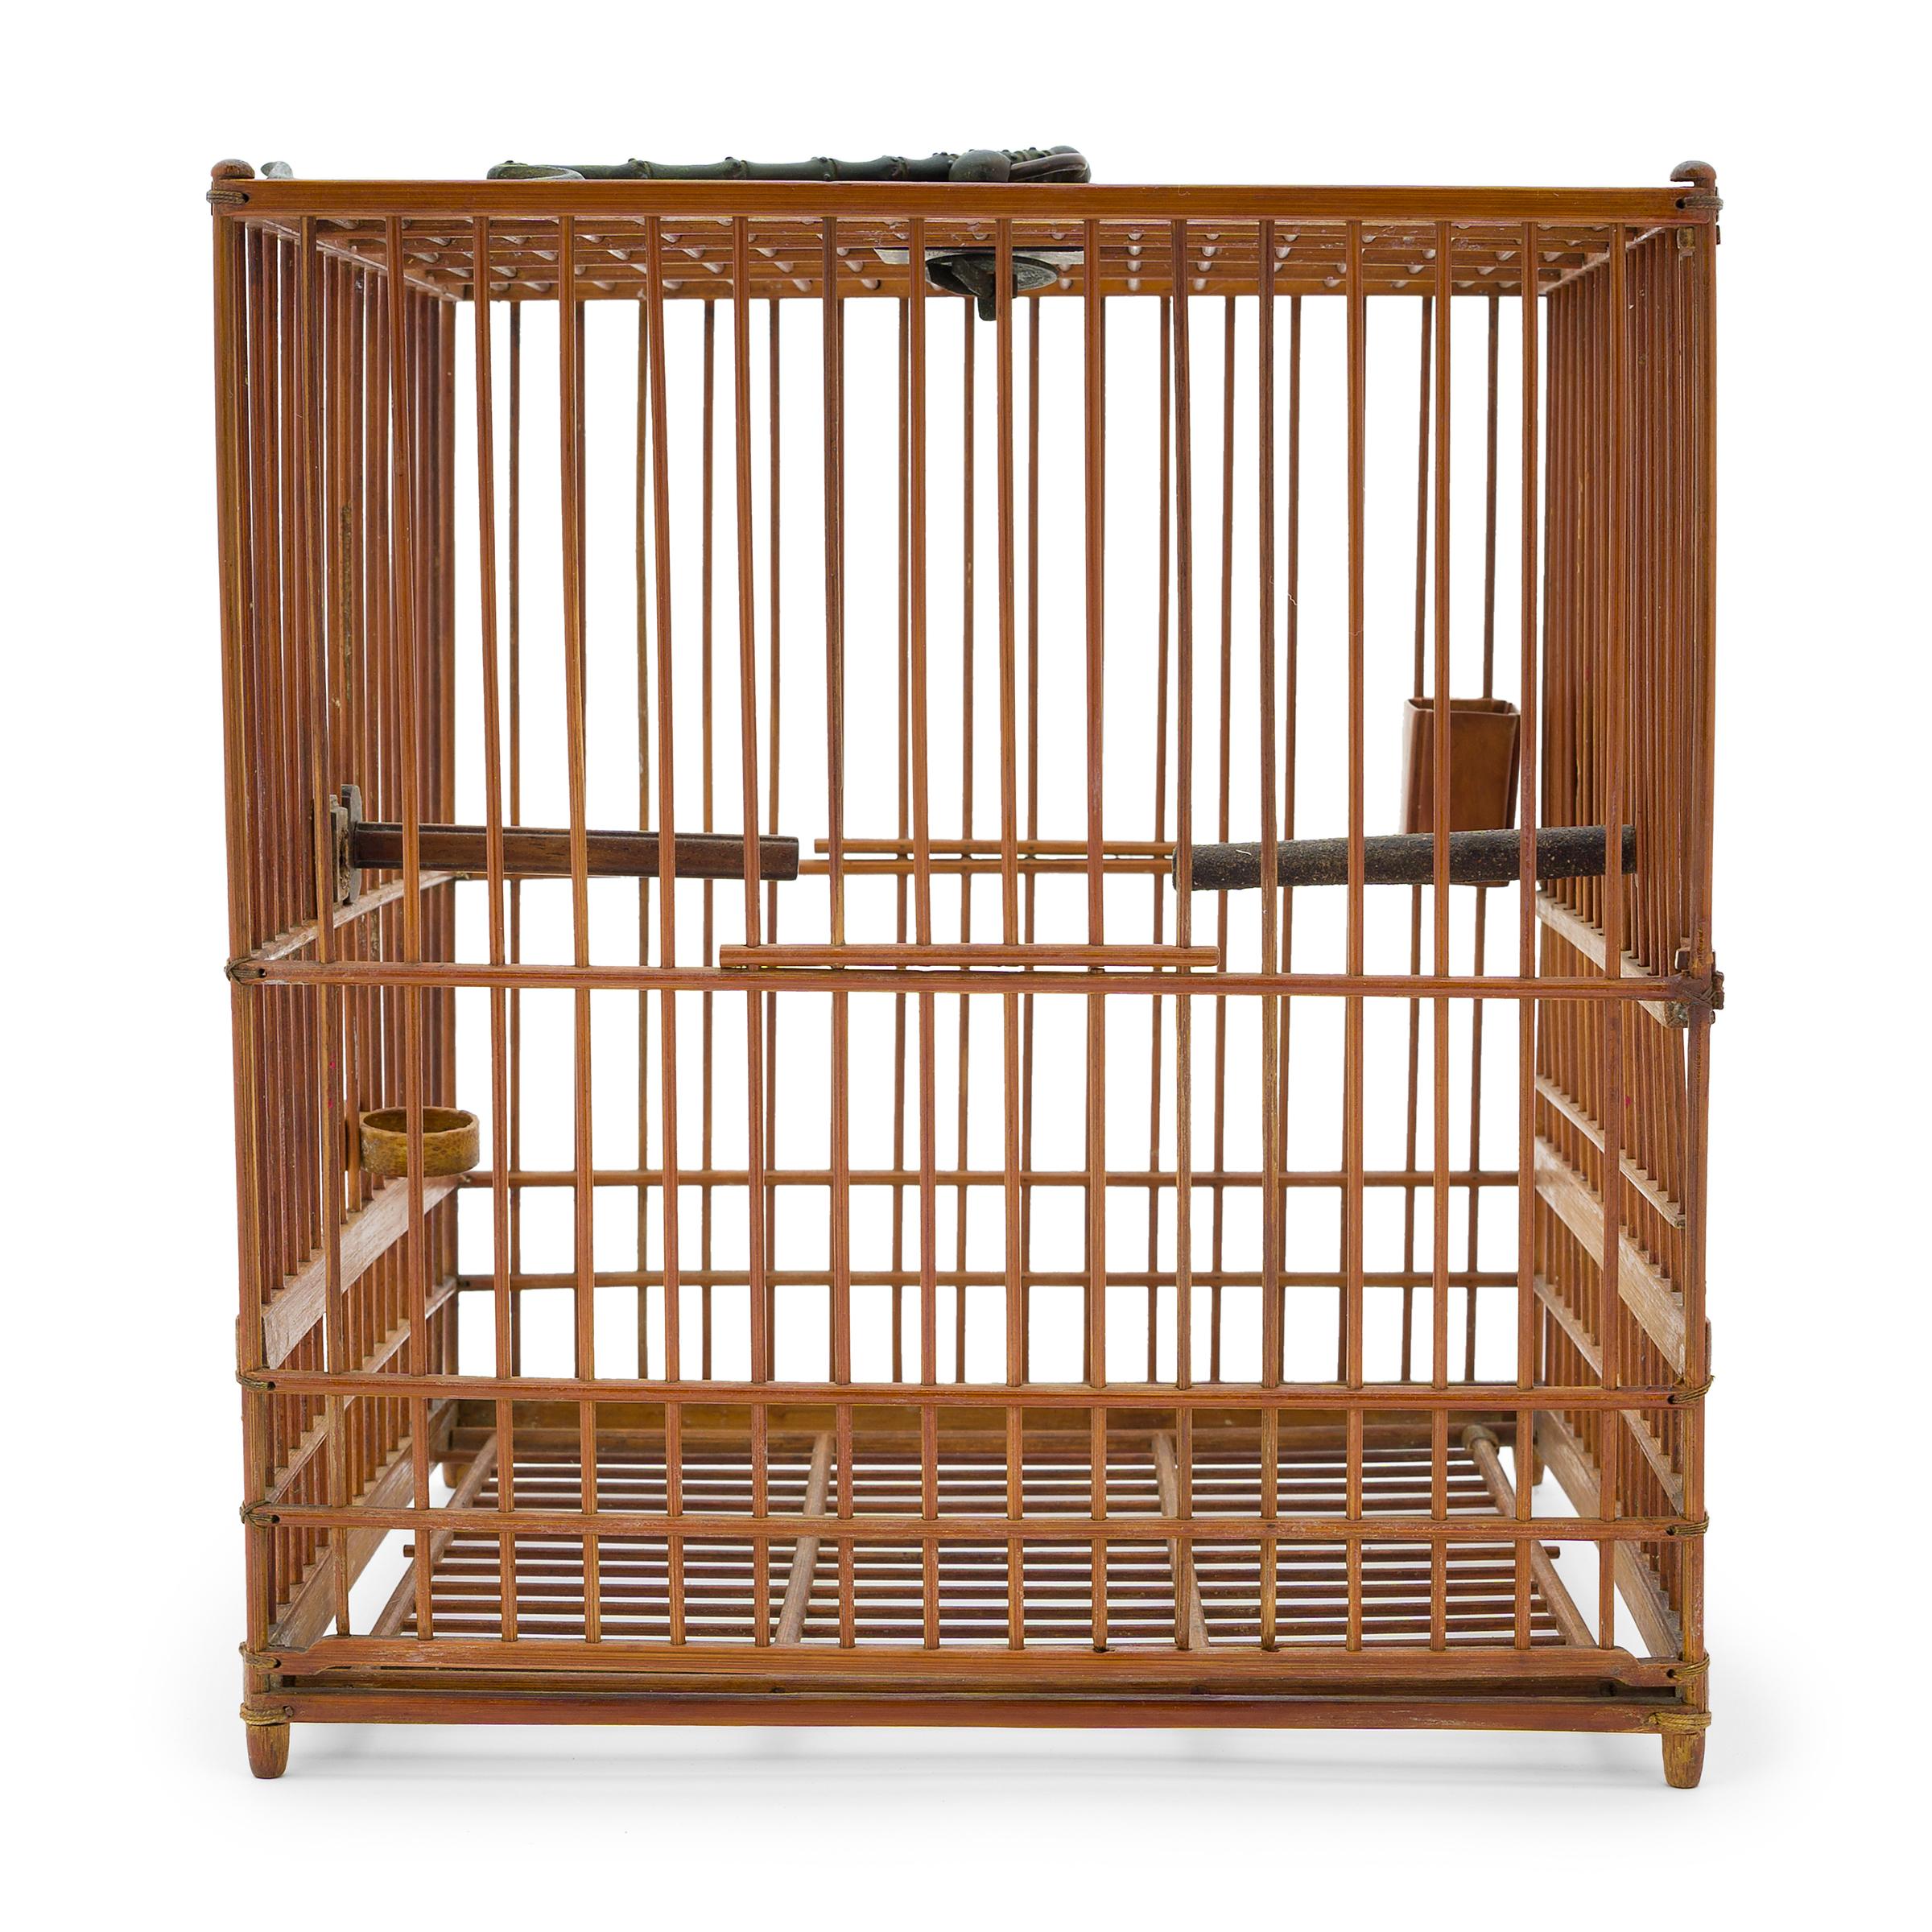 This well-proportioned birdcage was once home to the pet of a Qing-dynasty aristocrat. Dated to the early 20th century, the square cage is carefully assembled of thin rods of bamboo with a sliding side door and a metal hook on the top. Several